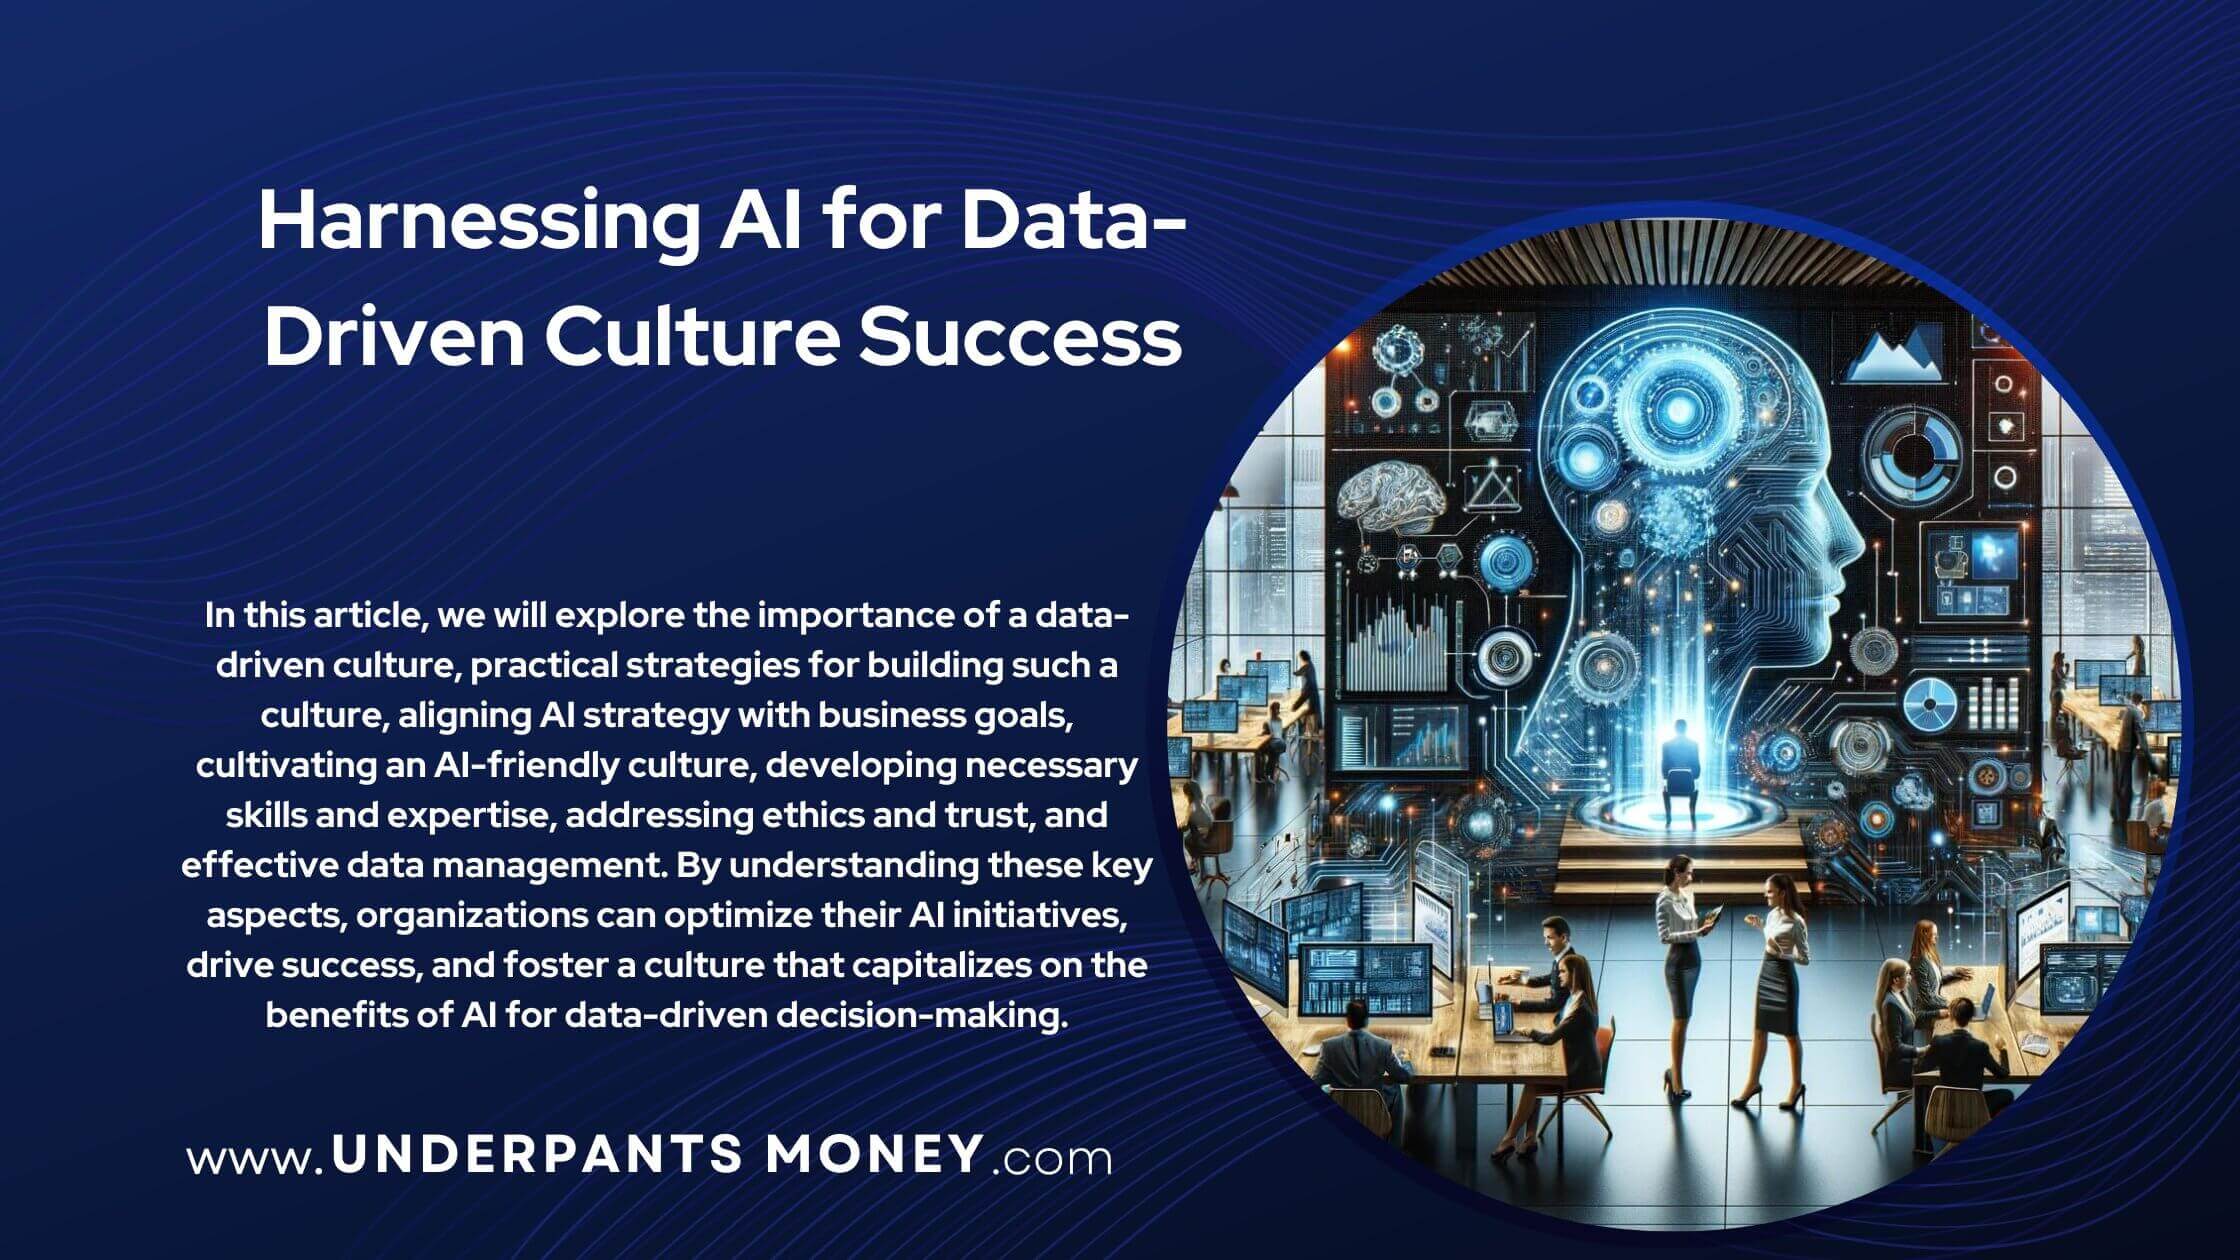 Ai for data driven culture title and description on blue with image of Ai helping a business succeed